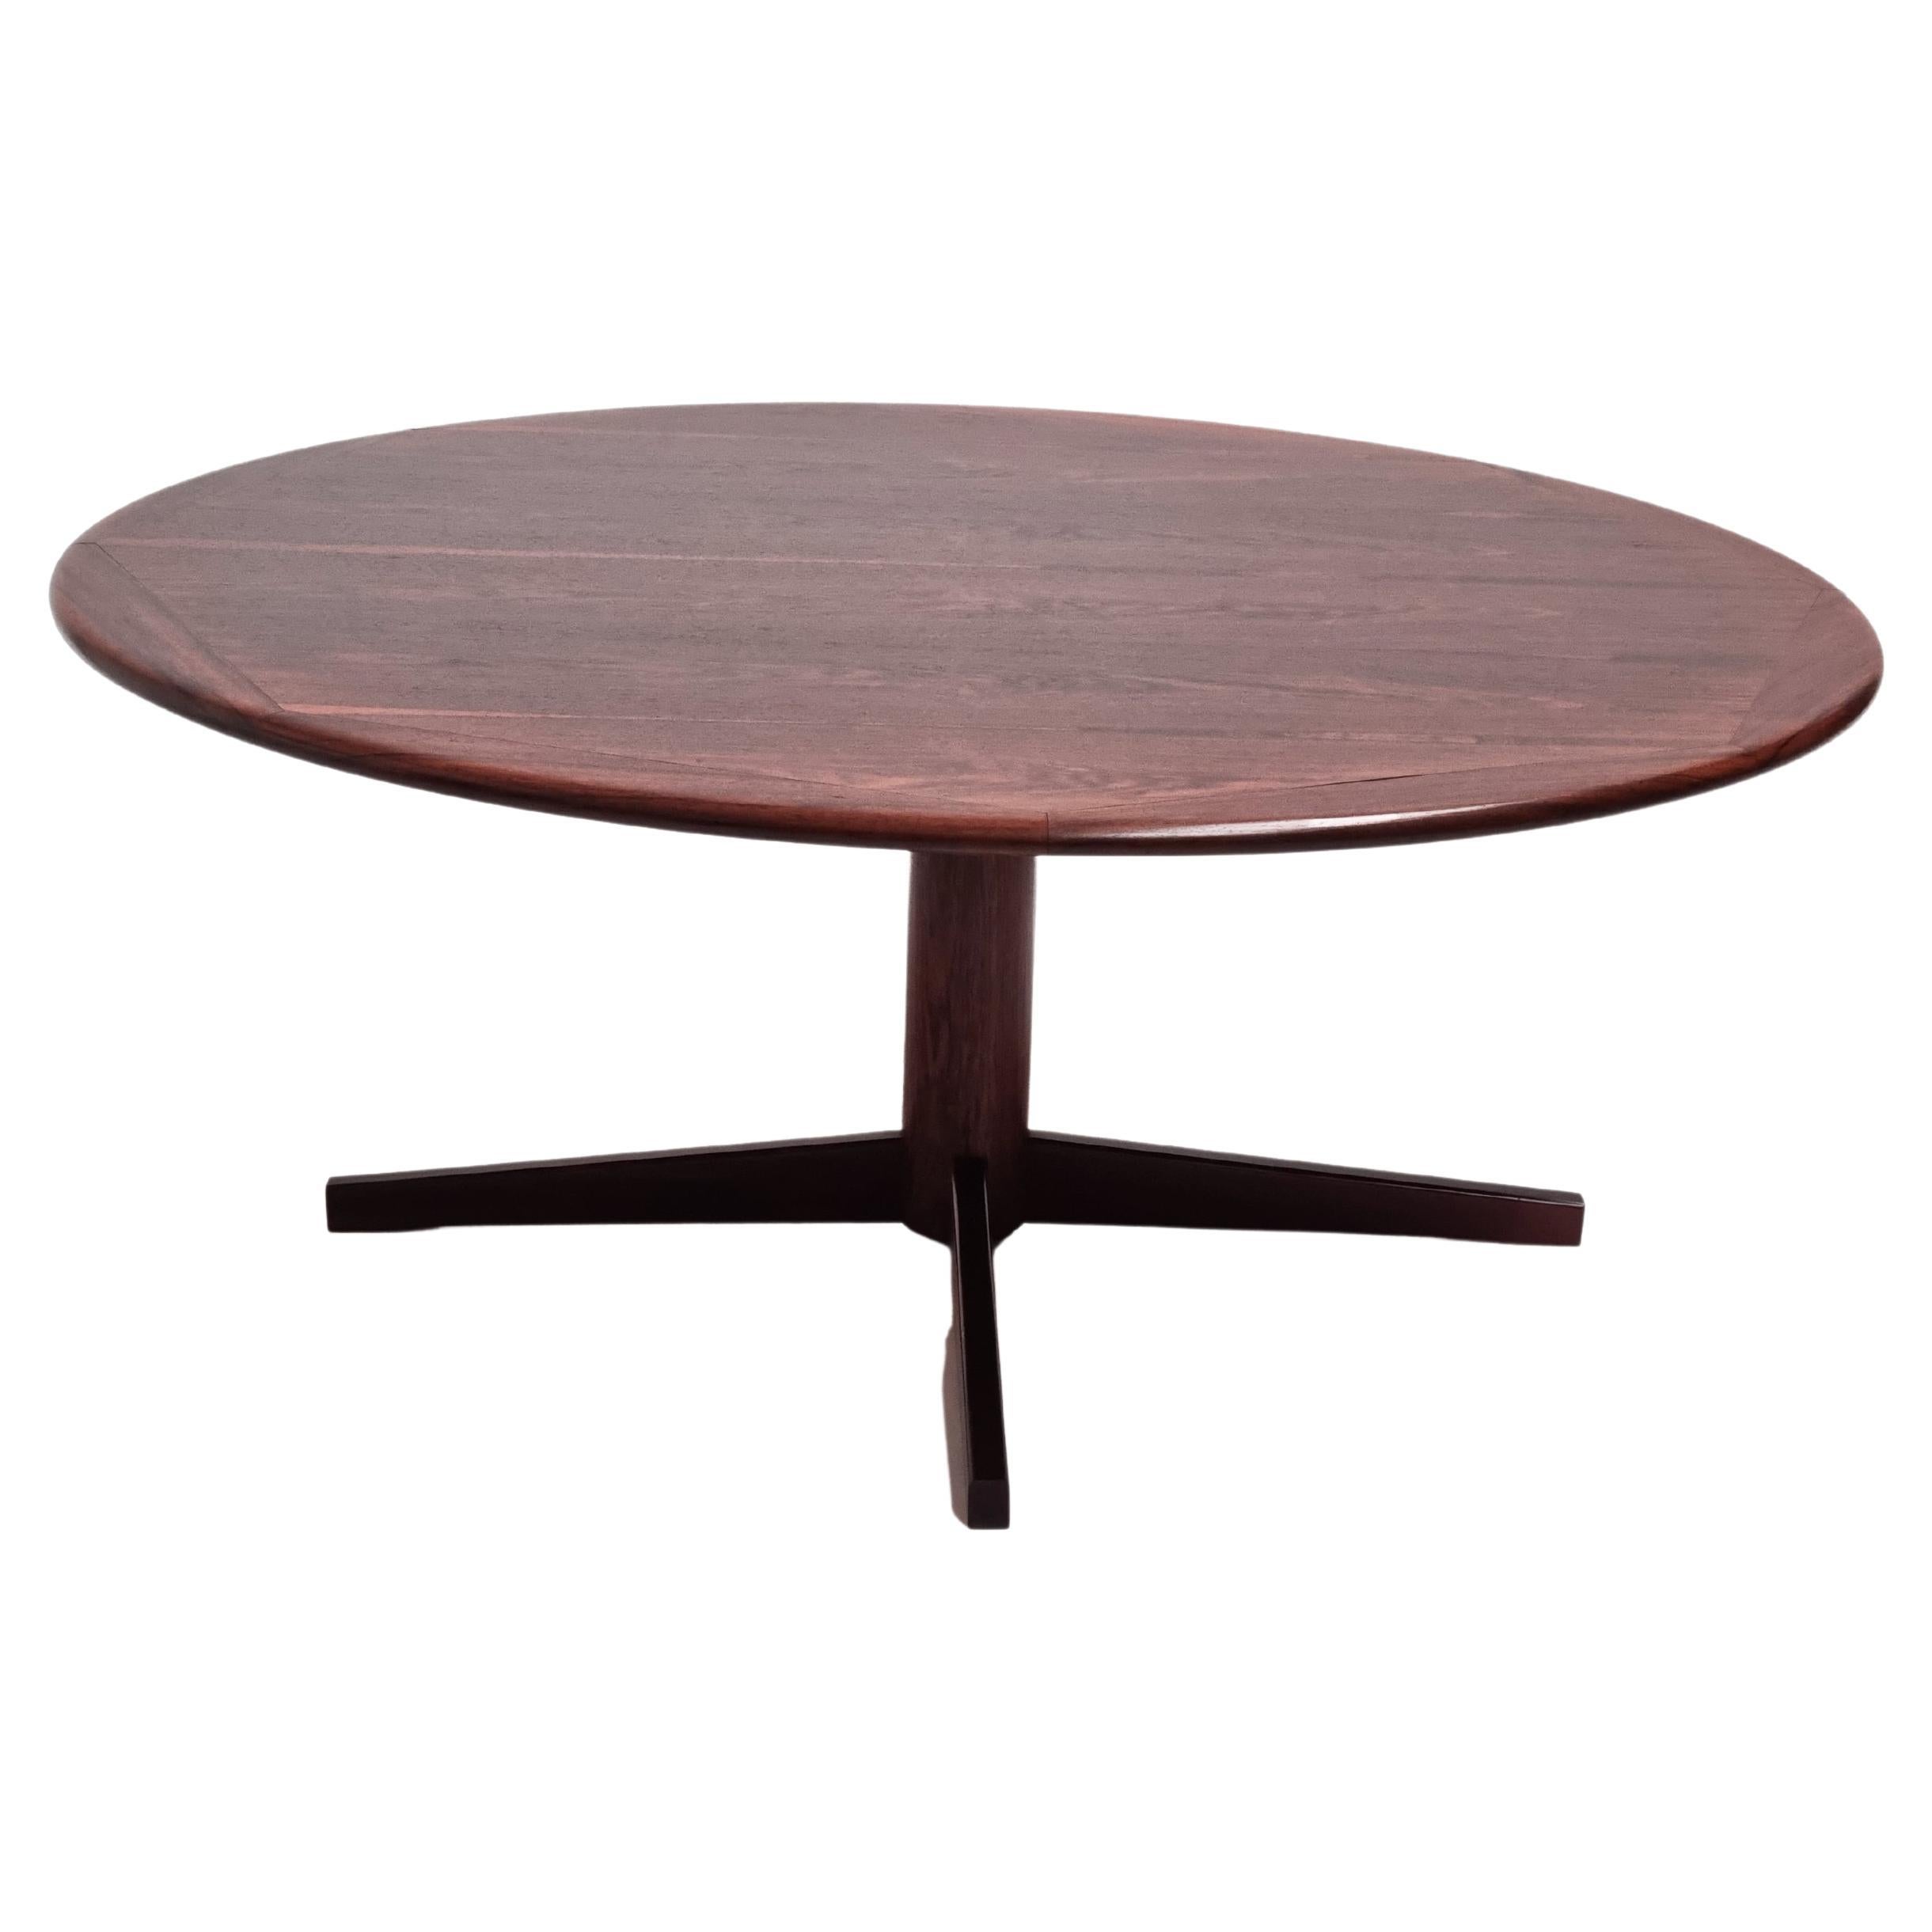 Table basse ronde danoise, annes 1960